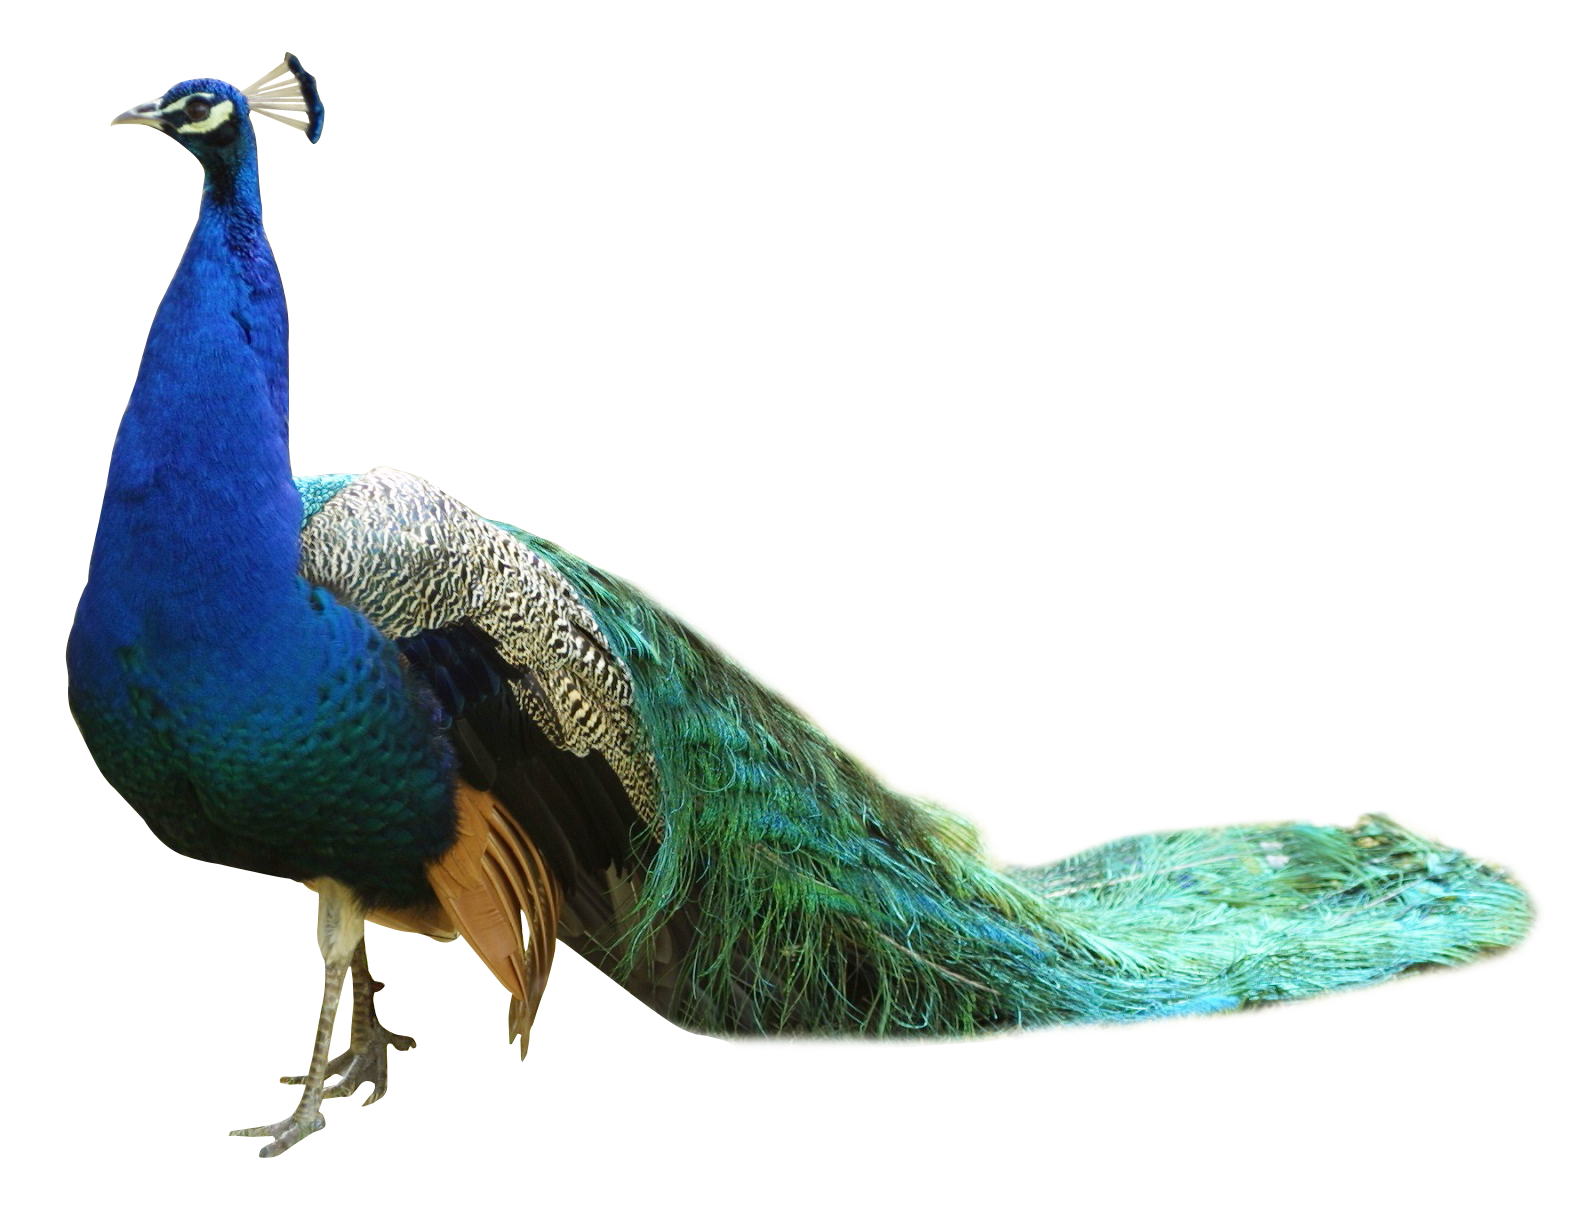 Download Peacock PNG Image for Free